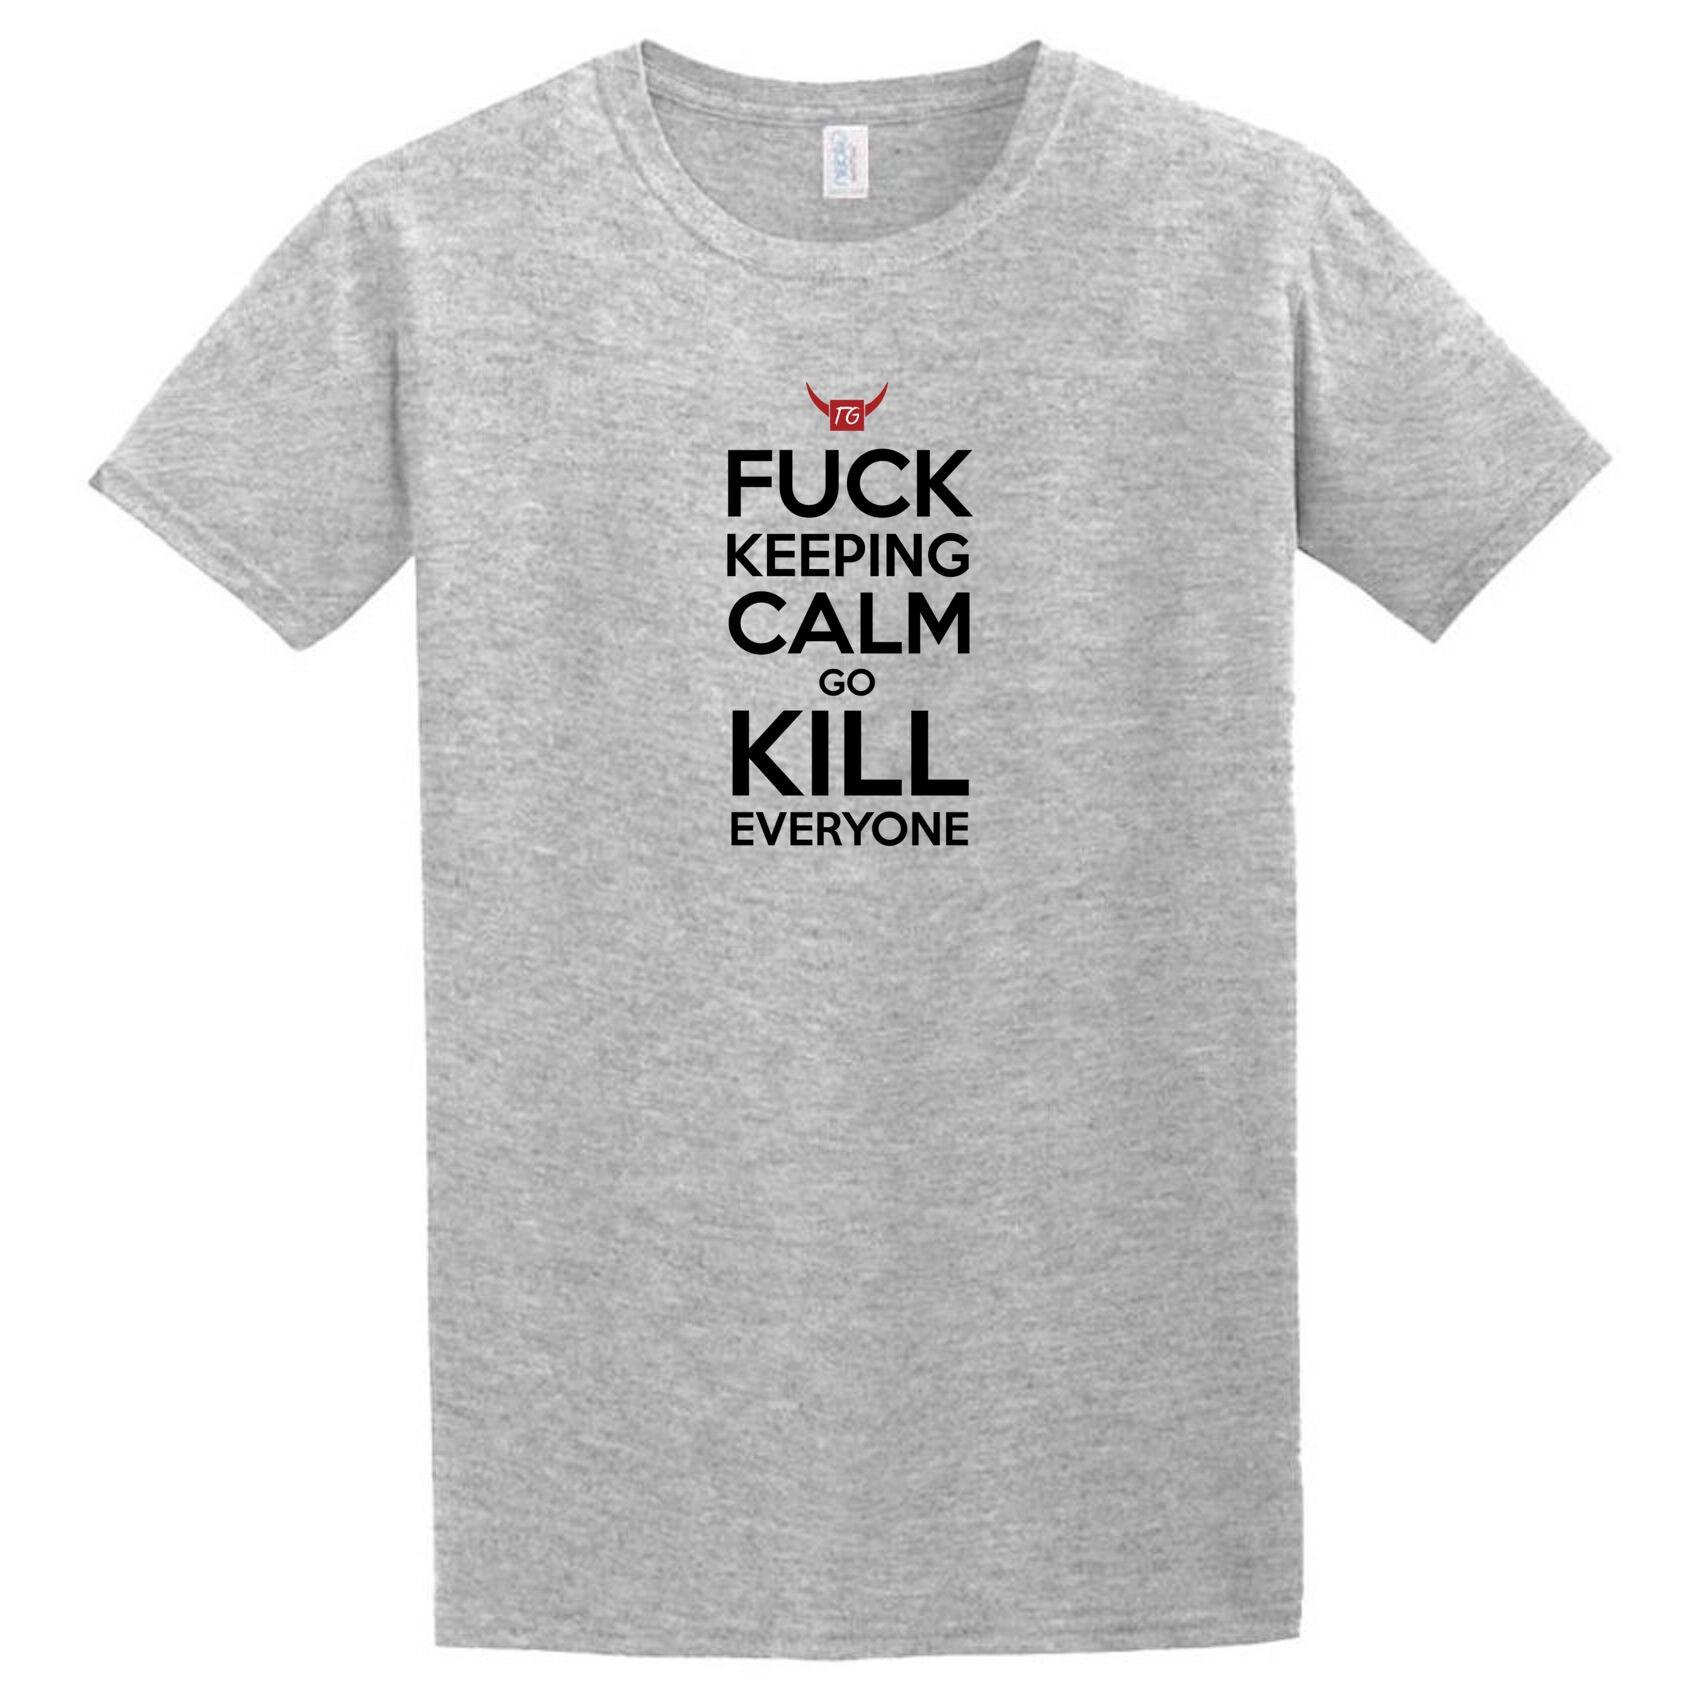 A grey Kill Everyone T-Shirt from Twisted Gifts that says fuck keeping calm kill me.